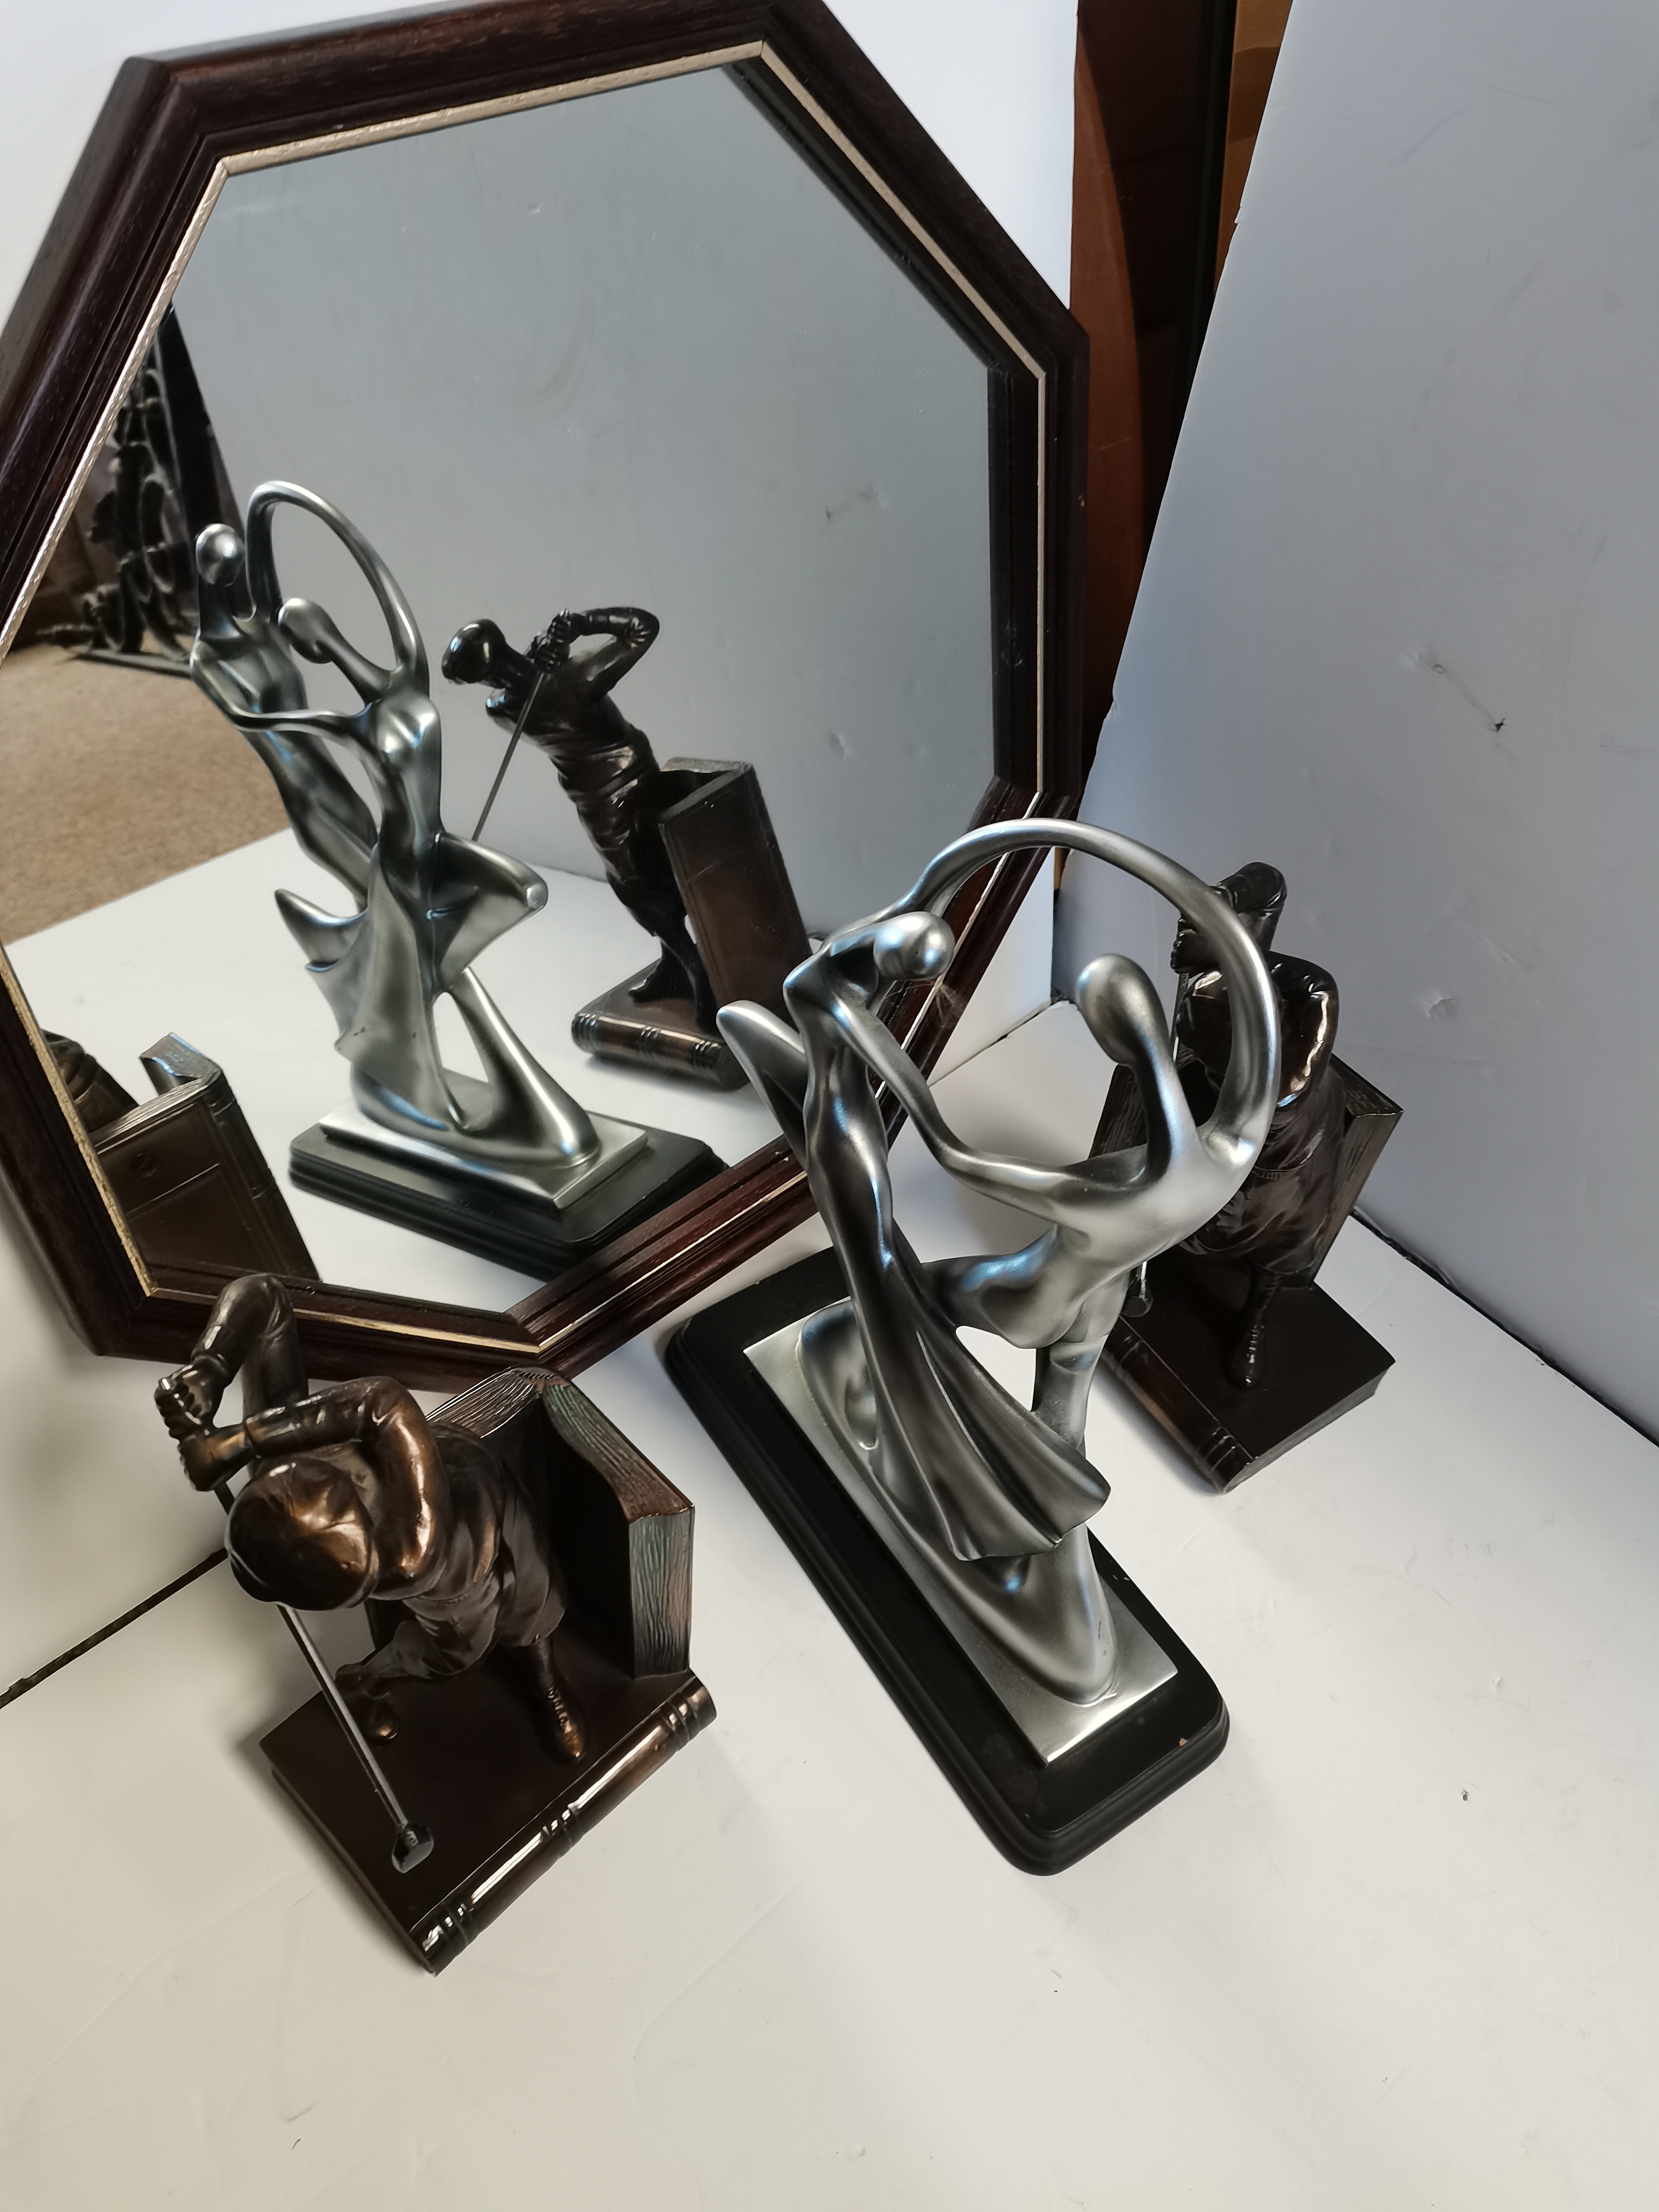 A Collectors lot including 2 Steering Wheels , Dressing Table Glass Set Golfing Figure Book Ends ,